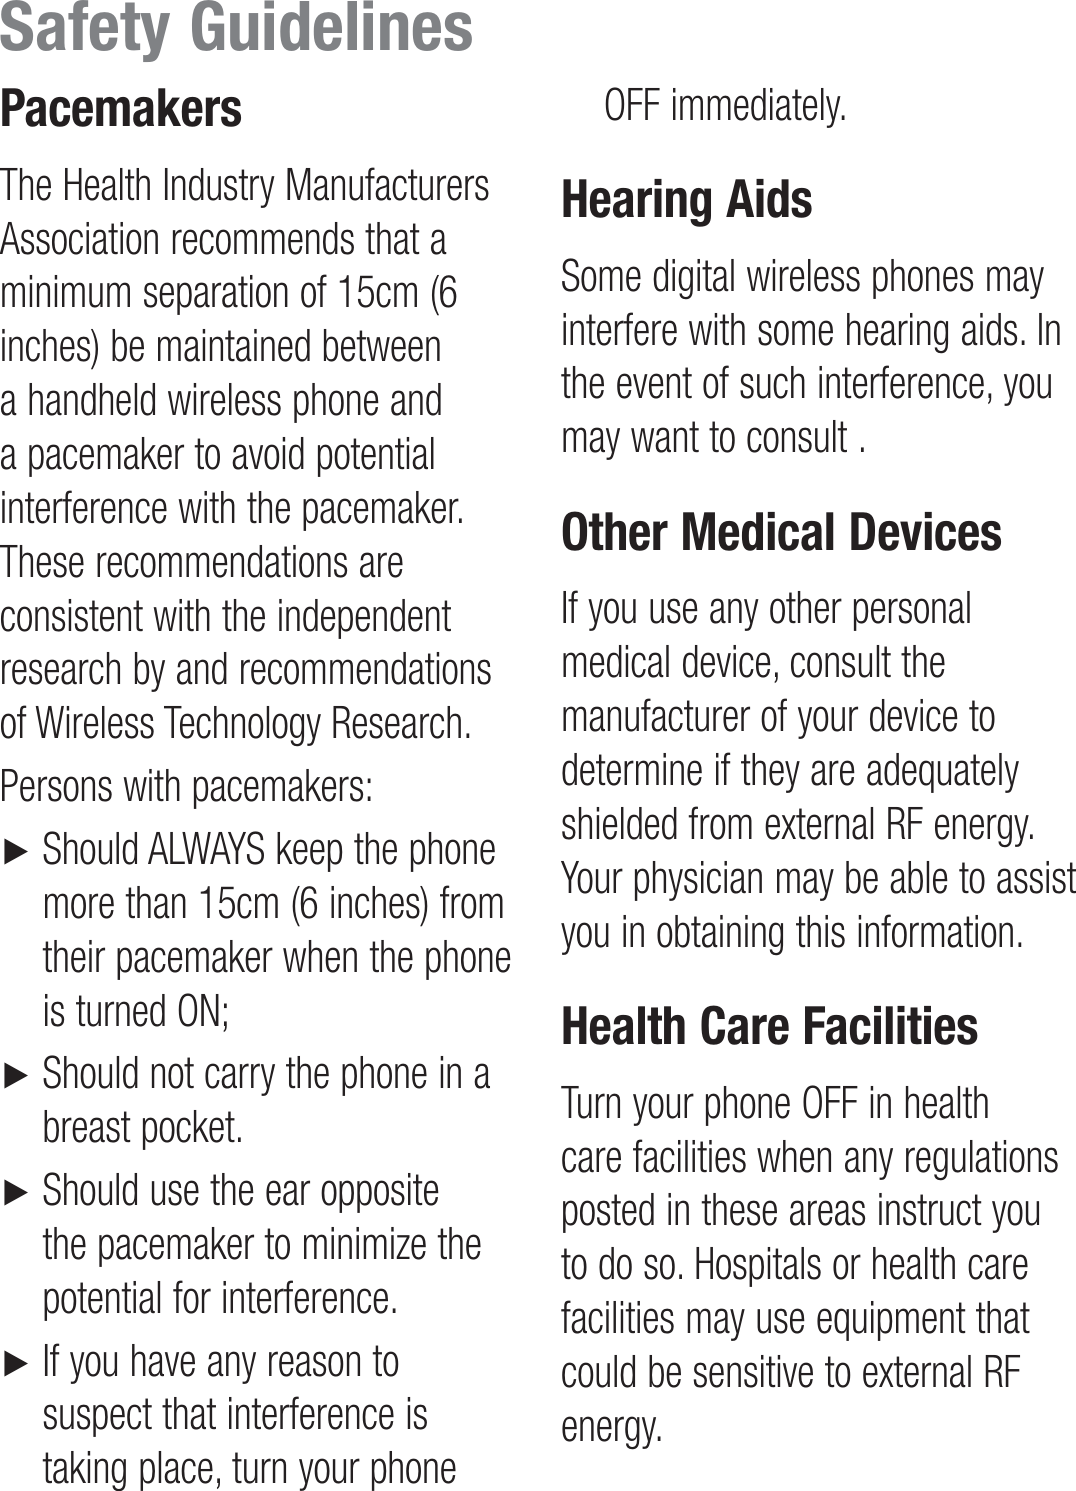 PacemakersThe Health Industry Manufacturers Association recommends that a minimum separation of 15cm (6 inches) be maintained between a handheld wireless phone and a pacemaker to avoid potential interference with the pacemaker. These recommendations are consistent with the independent research by and recommendations of Wireless Technology Research.Persons with pacemakers:►      Should ALWAYS keep the phone more than 15cm (6 inches) from their pacemaker when the phone is turned ON;►     Should not carry the phone in a breast pocket.►     Should use the ear opposite the pacemaker to minimize the potential for interference.►      If you have any reason to suspect that interference is taking place, turn your phone OFF immediately.Hearing AidsSome digital wireless phones may interfere with some hearing aids. In the event of such interference, you may want to consult .Other Medical DevicesIf you use any other personal medical device, consult the manufacturer of your device to determine if they are adequately shielded from external RF energy. Your physician may be able to assist you in obtaining this information.Health Care FacilitiesTurn your phone OFF in health care facilities when any regulations posted in these areas instruct you to do so. Hospitals or health care facilities may use equipment that could be sensitive to external RF energy.Safety Guidelines